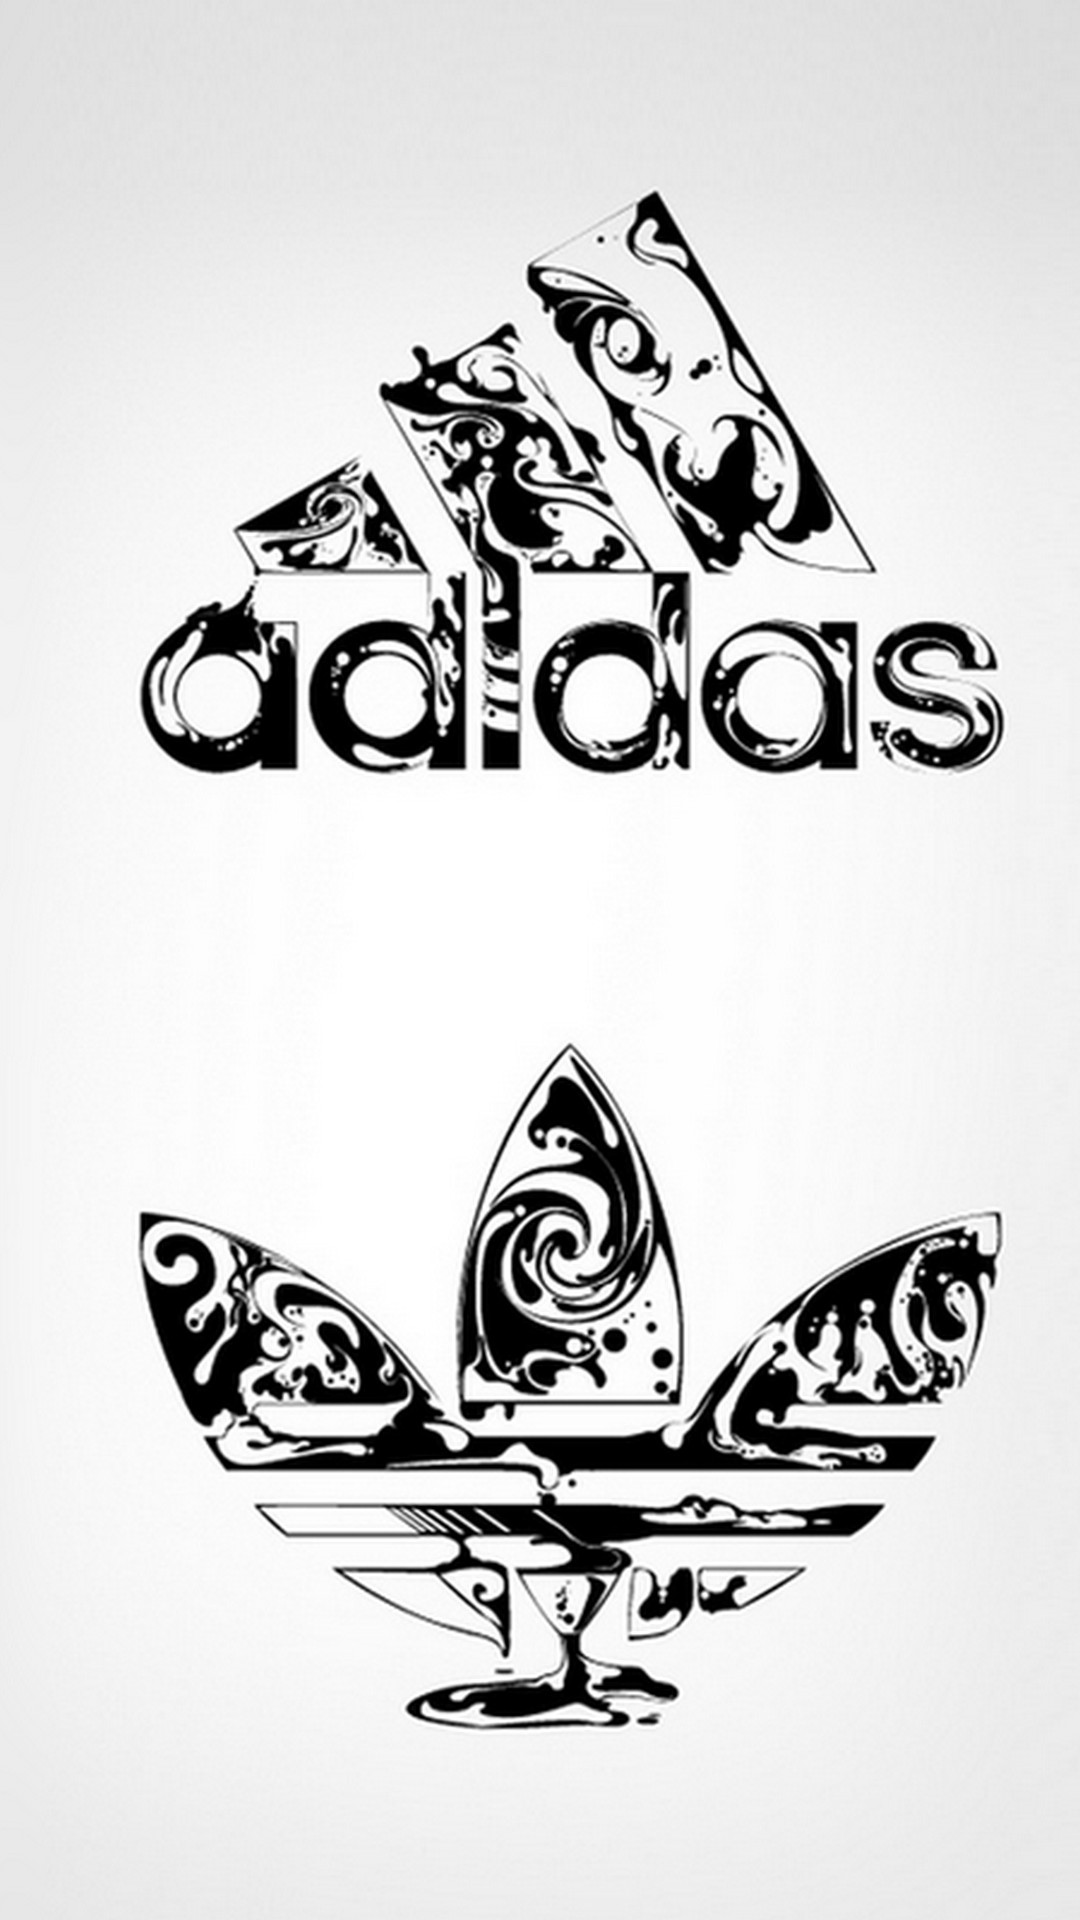 Cool Adidas  Wallpapers